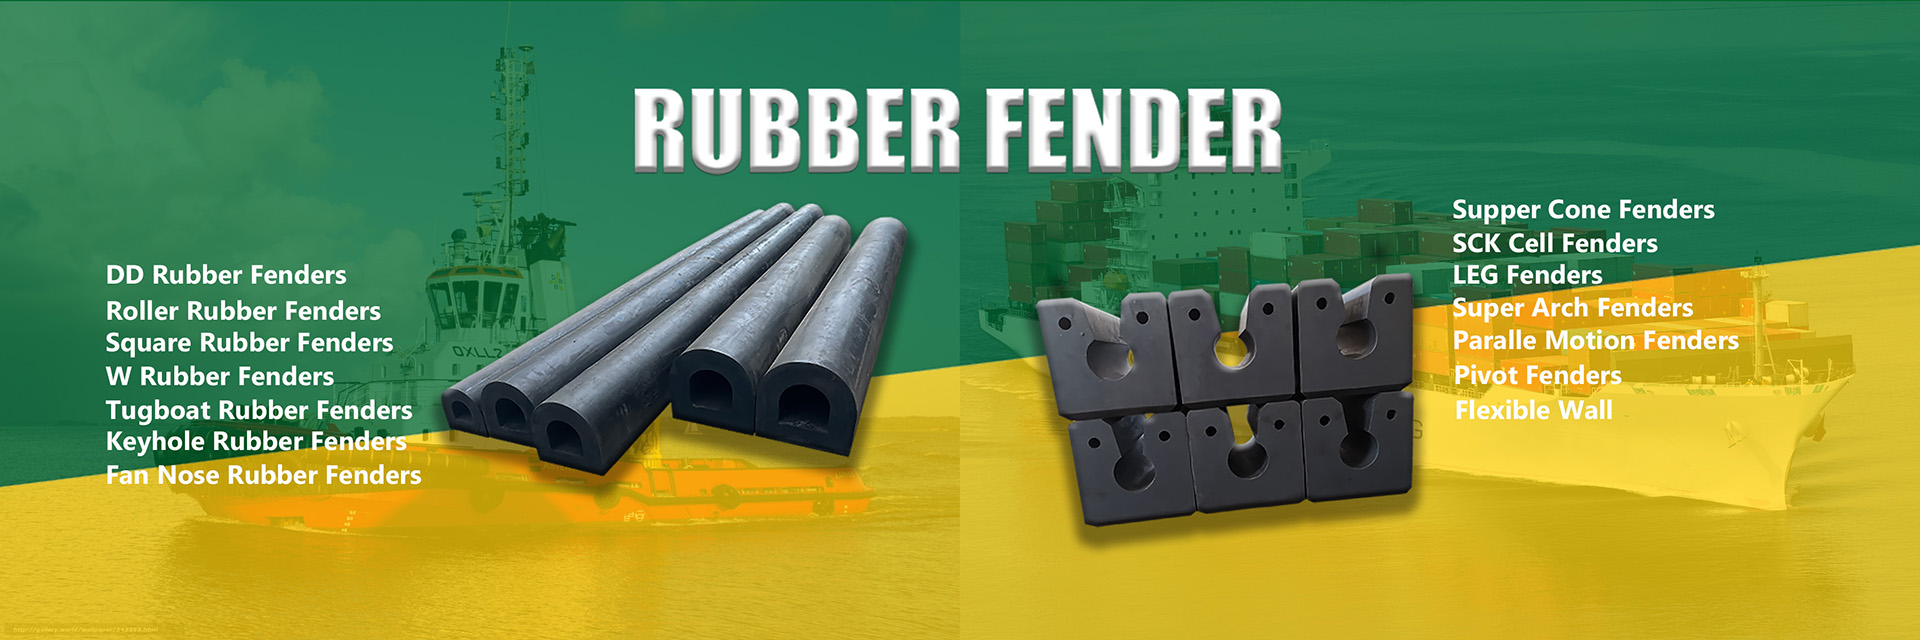 Rubber Fender products